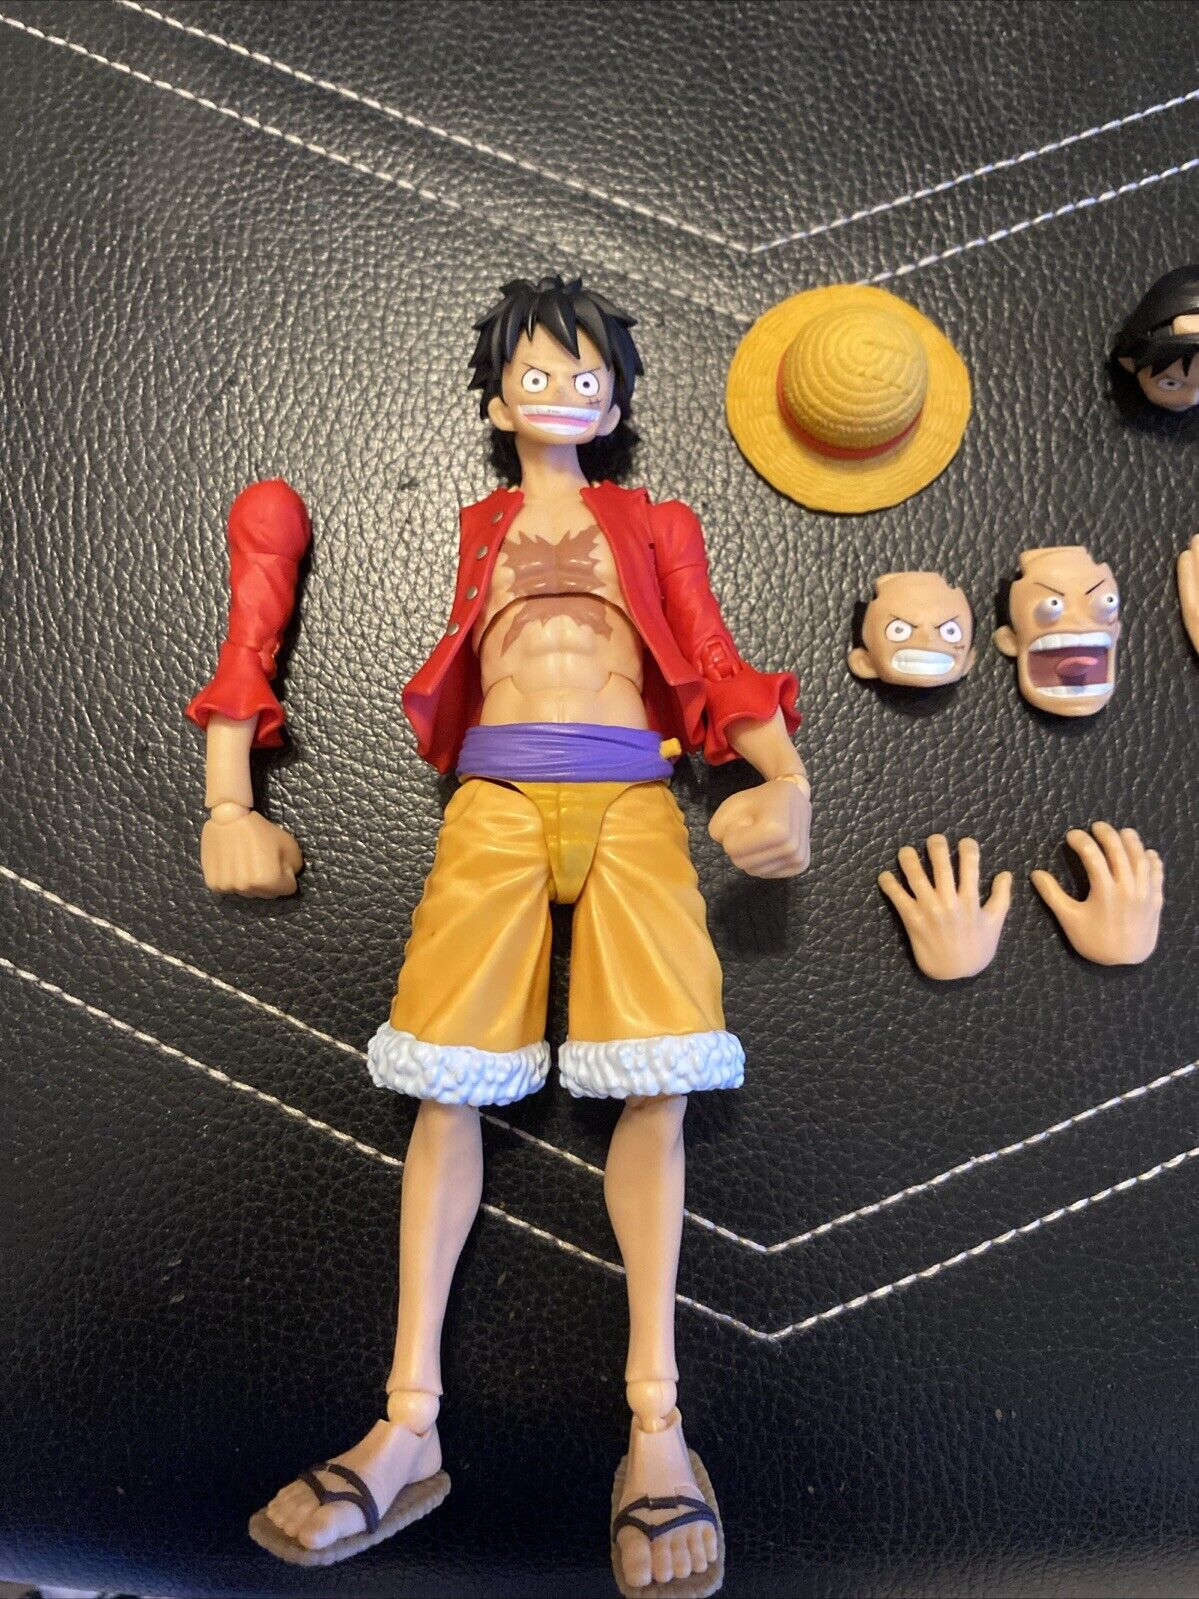 S.H. Figuarts One Piece Monkey D Luffy figure Bandai Broken Arm;-; With Box